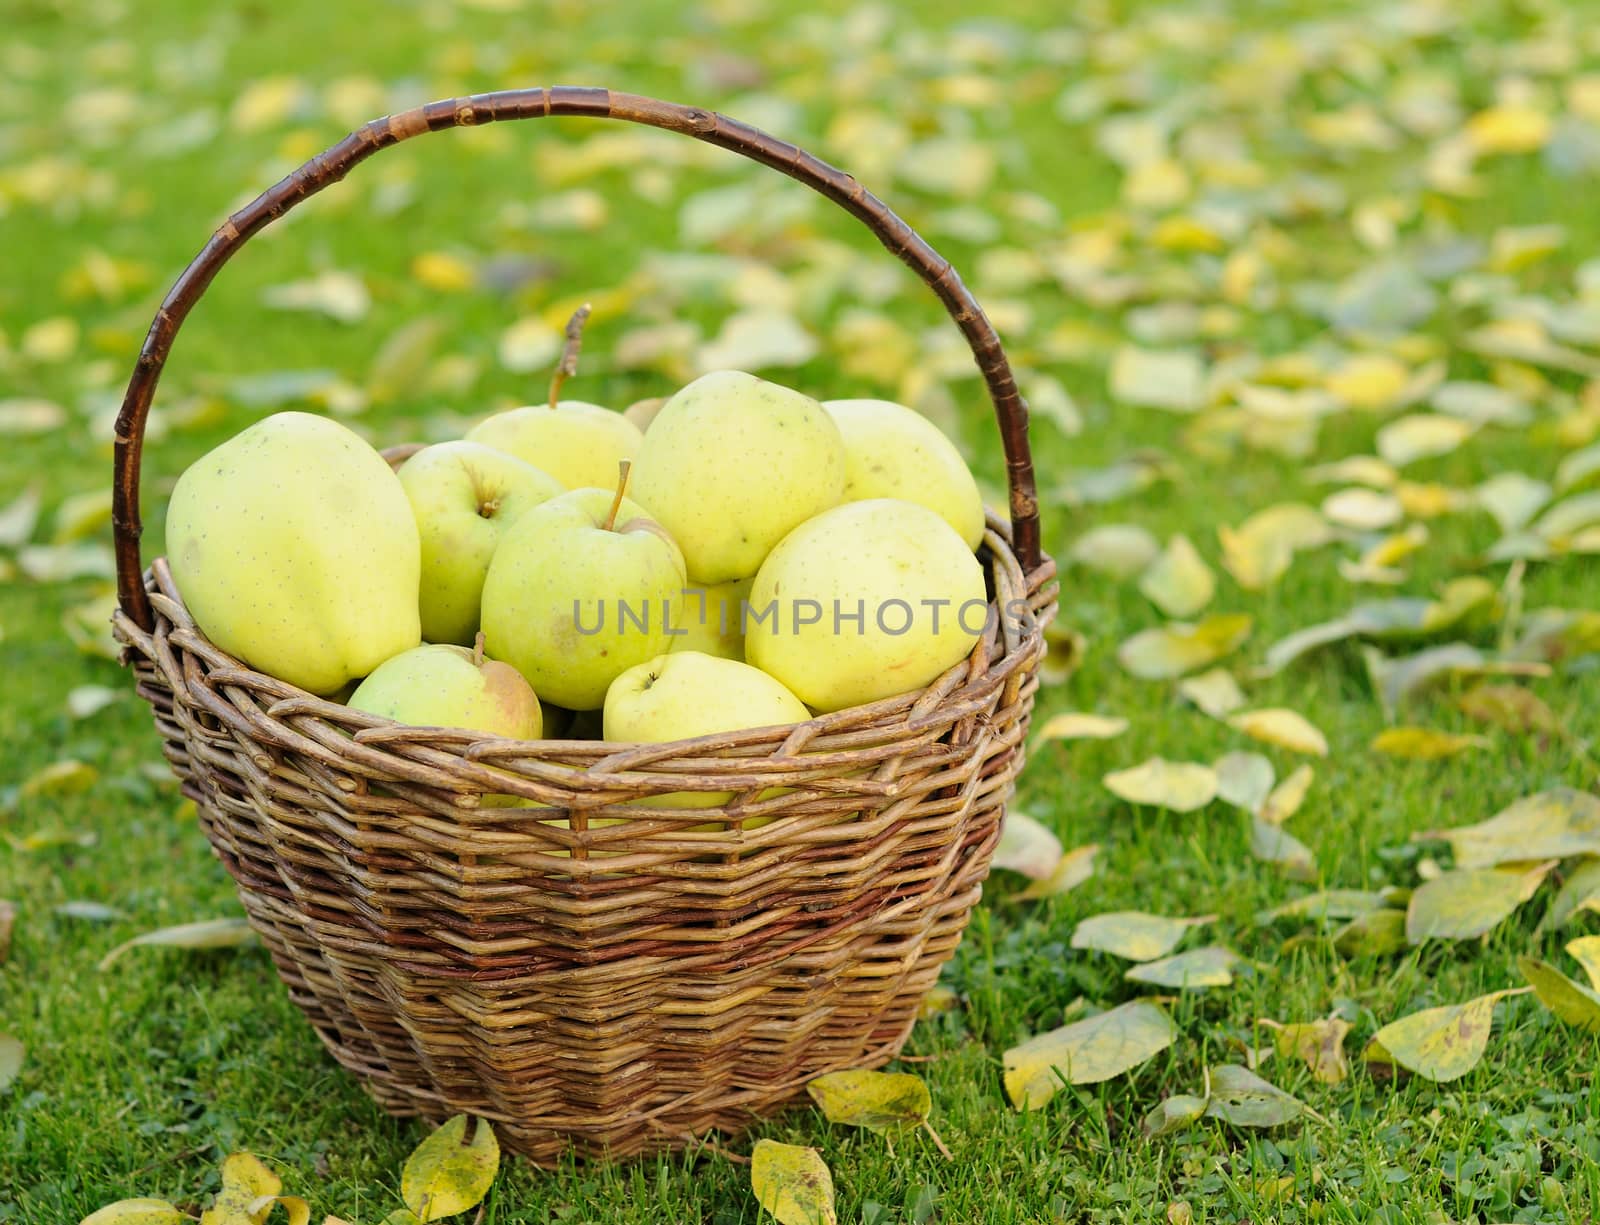 Green apples by hamik